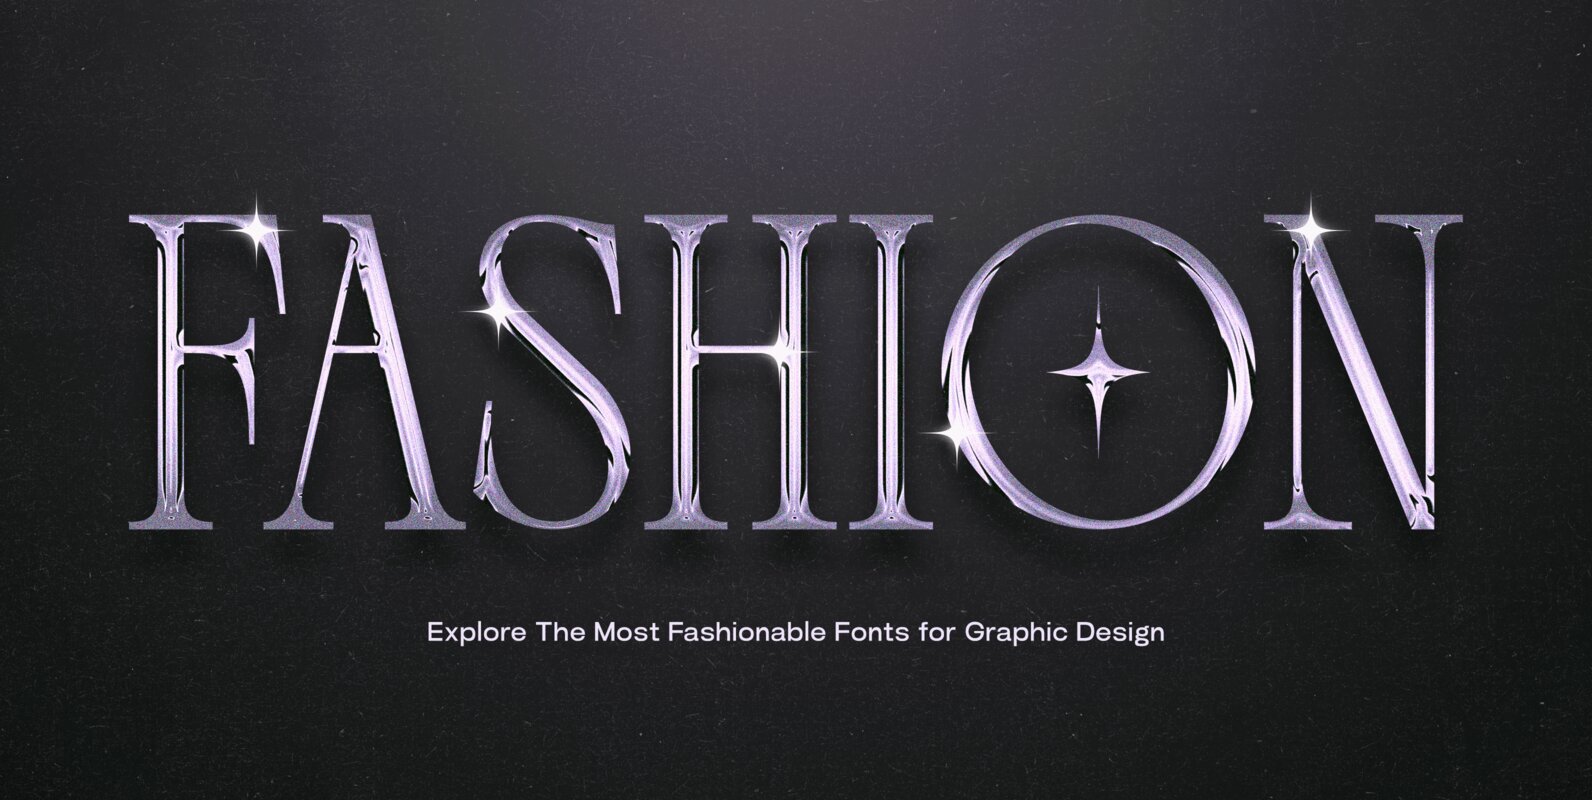 The Most Fashionable Fonts for Graphic Design